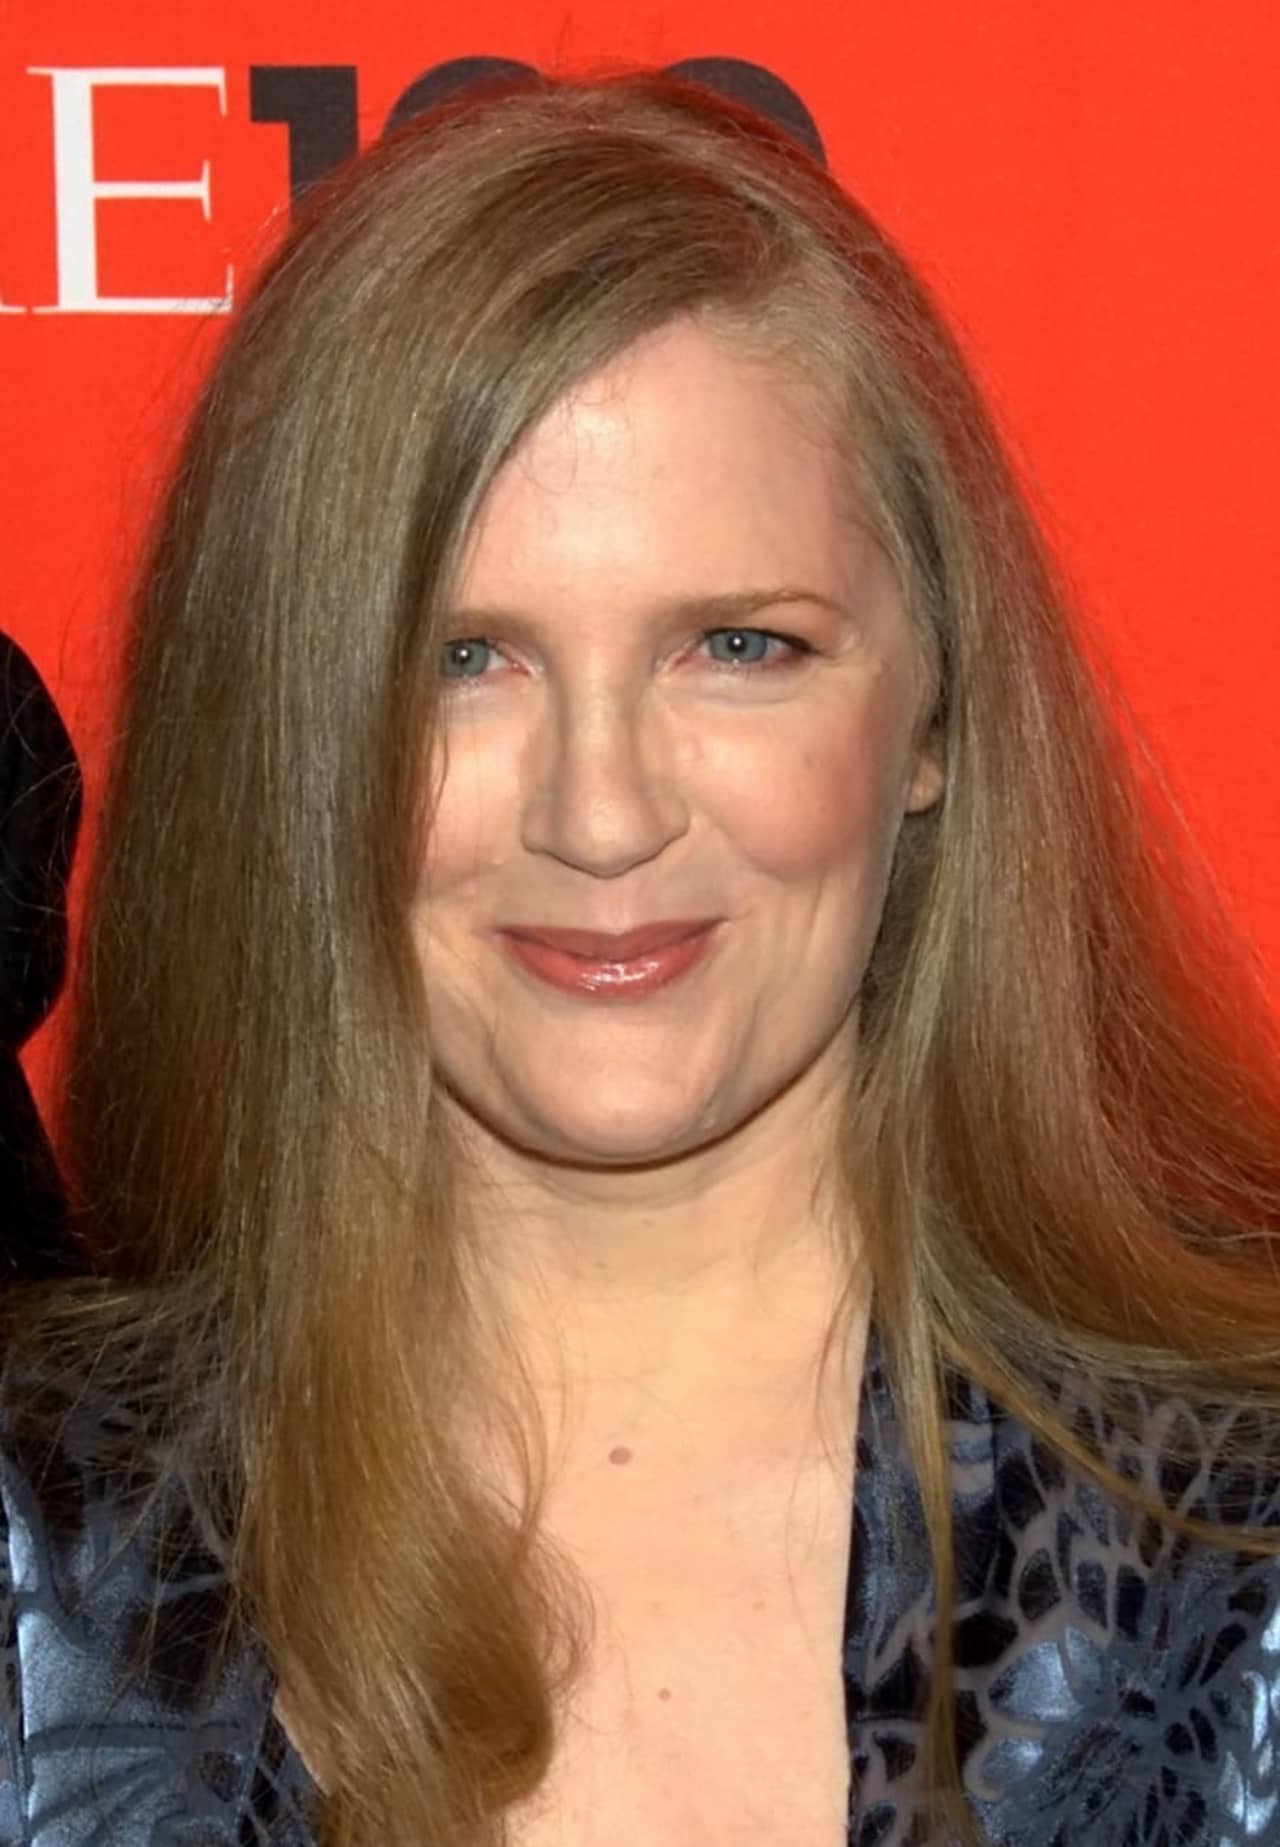 "Hunger Games" author Suzanne Collins lives in Newtown.